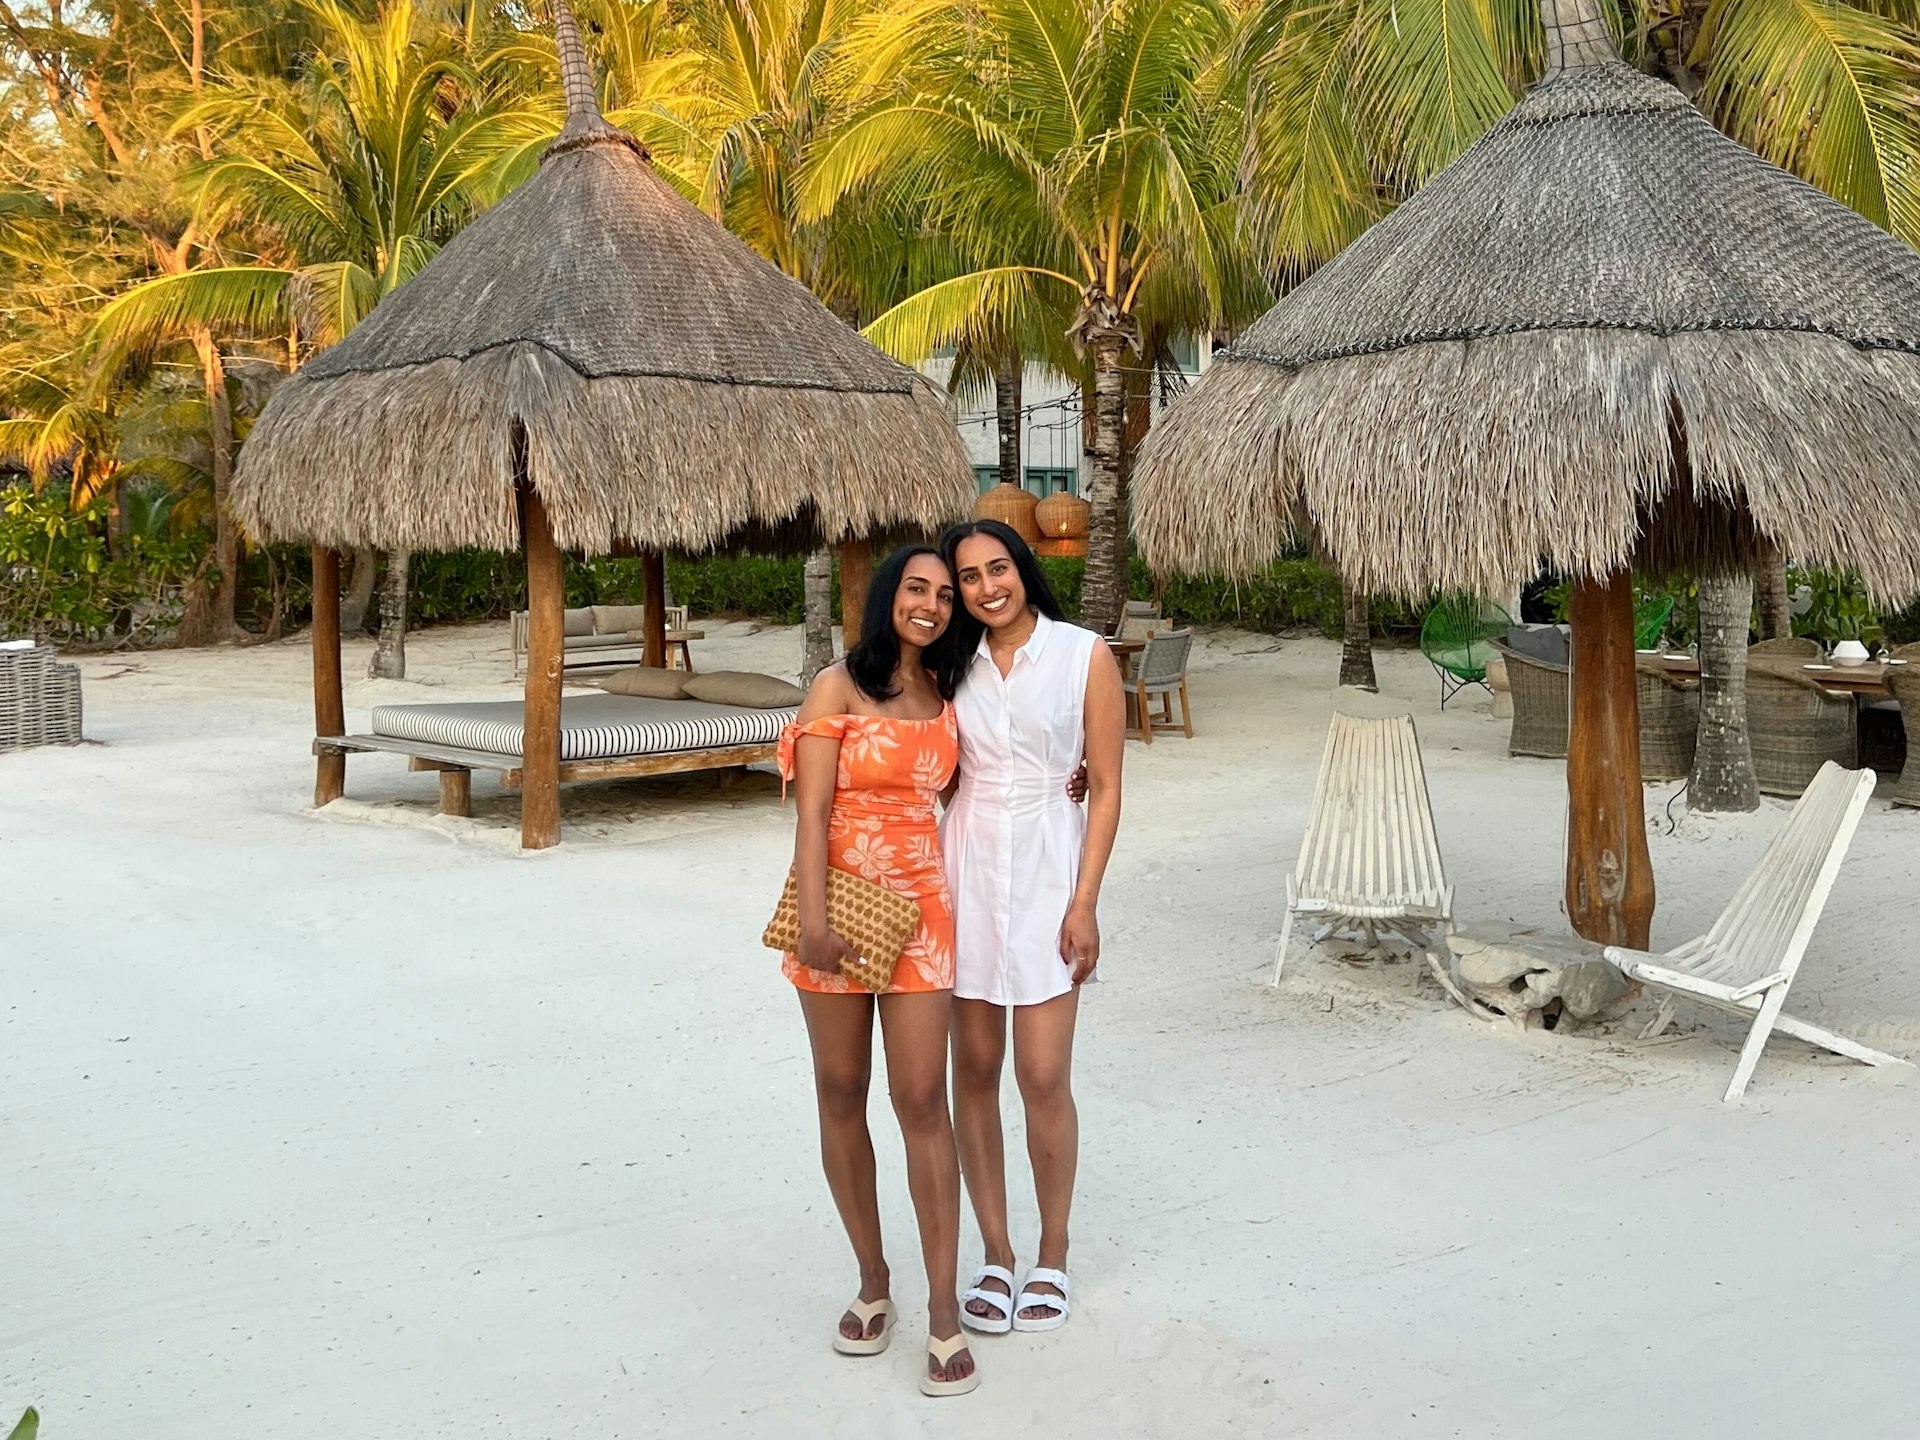 Serina and her sister pose on the beach in Isla Holbox